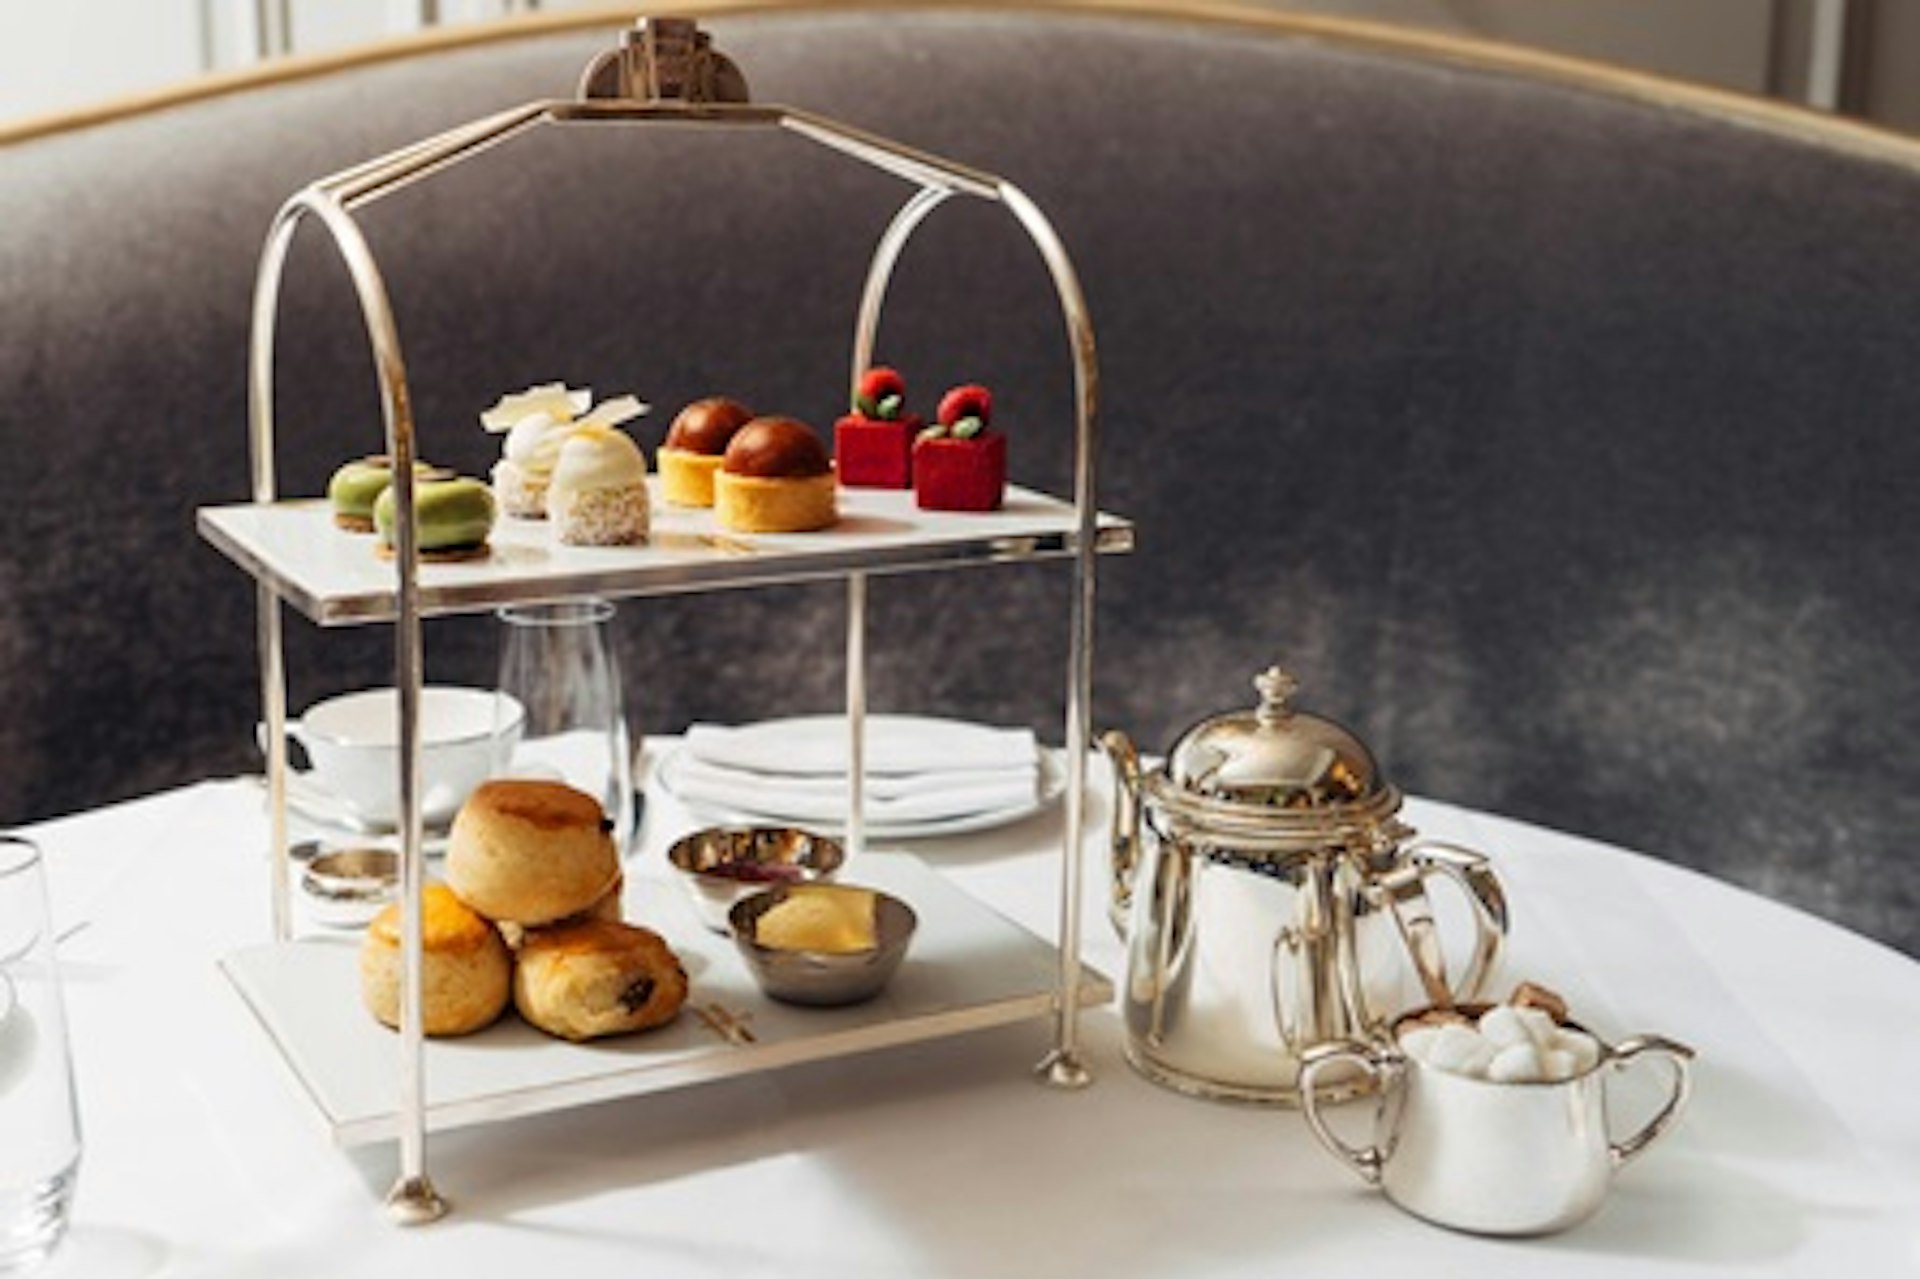 Afternoon Tea for Two at The Harrods Tea Rooms 1